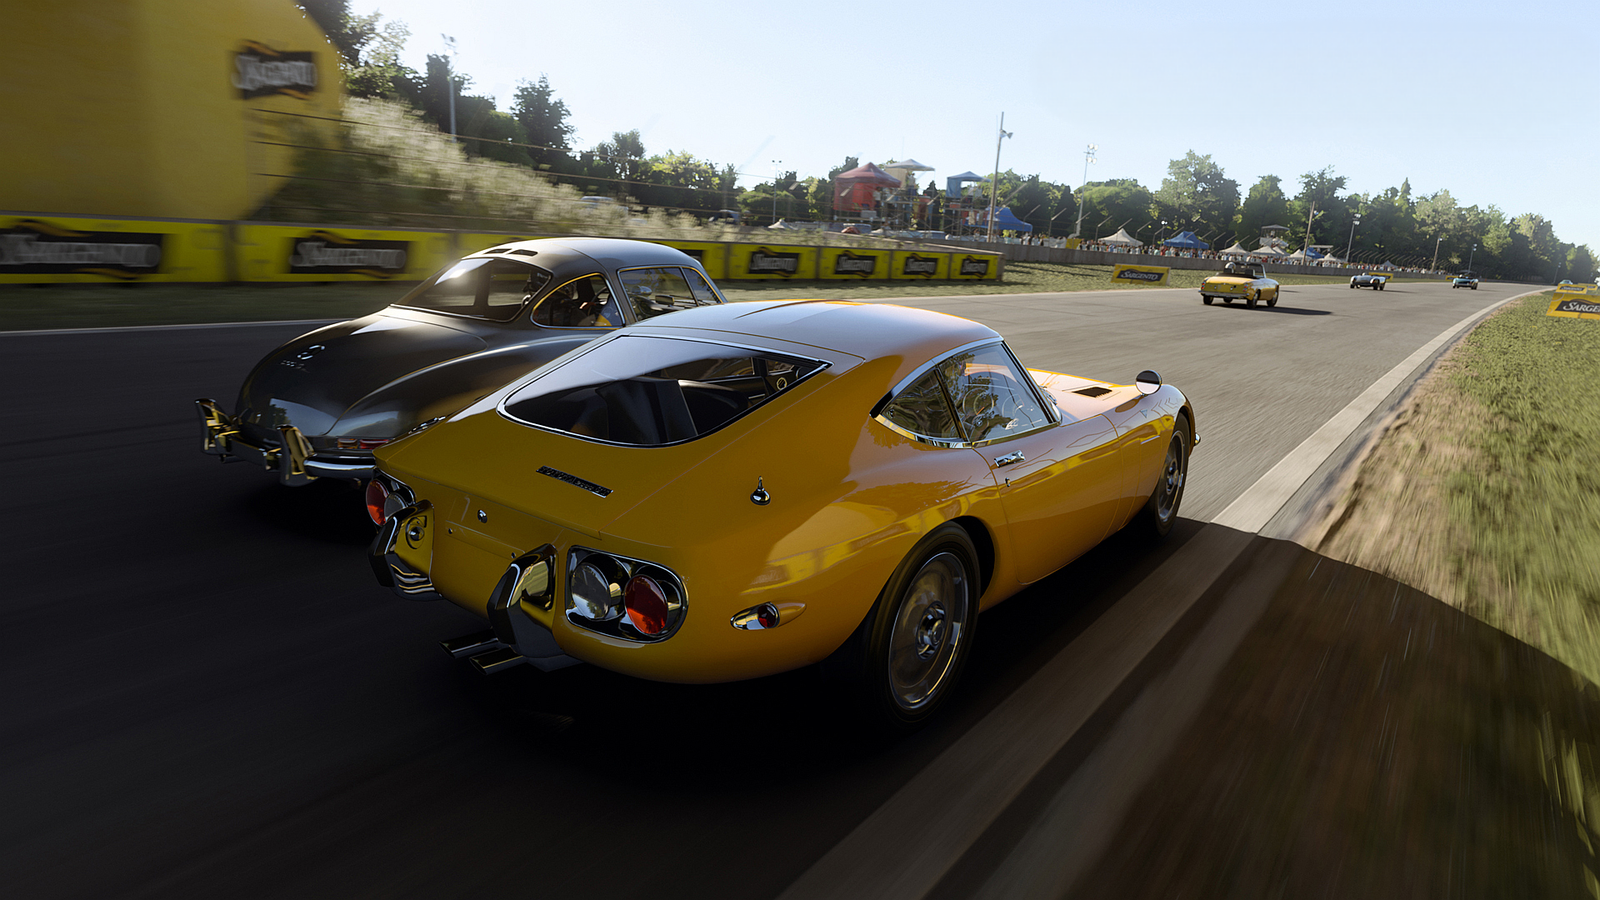 MGR Racing - Xbox & Games Industry - Official Forza Community Forums